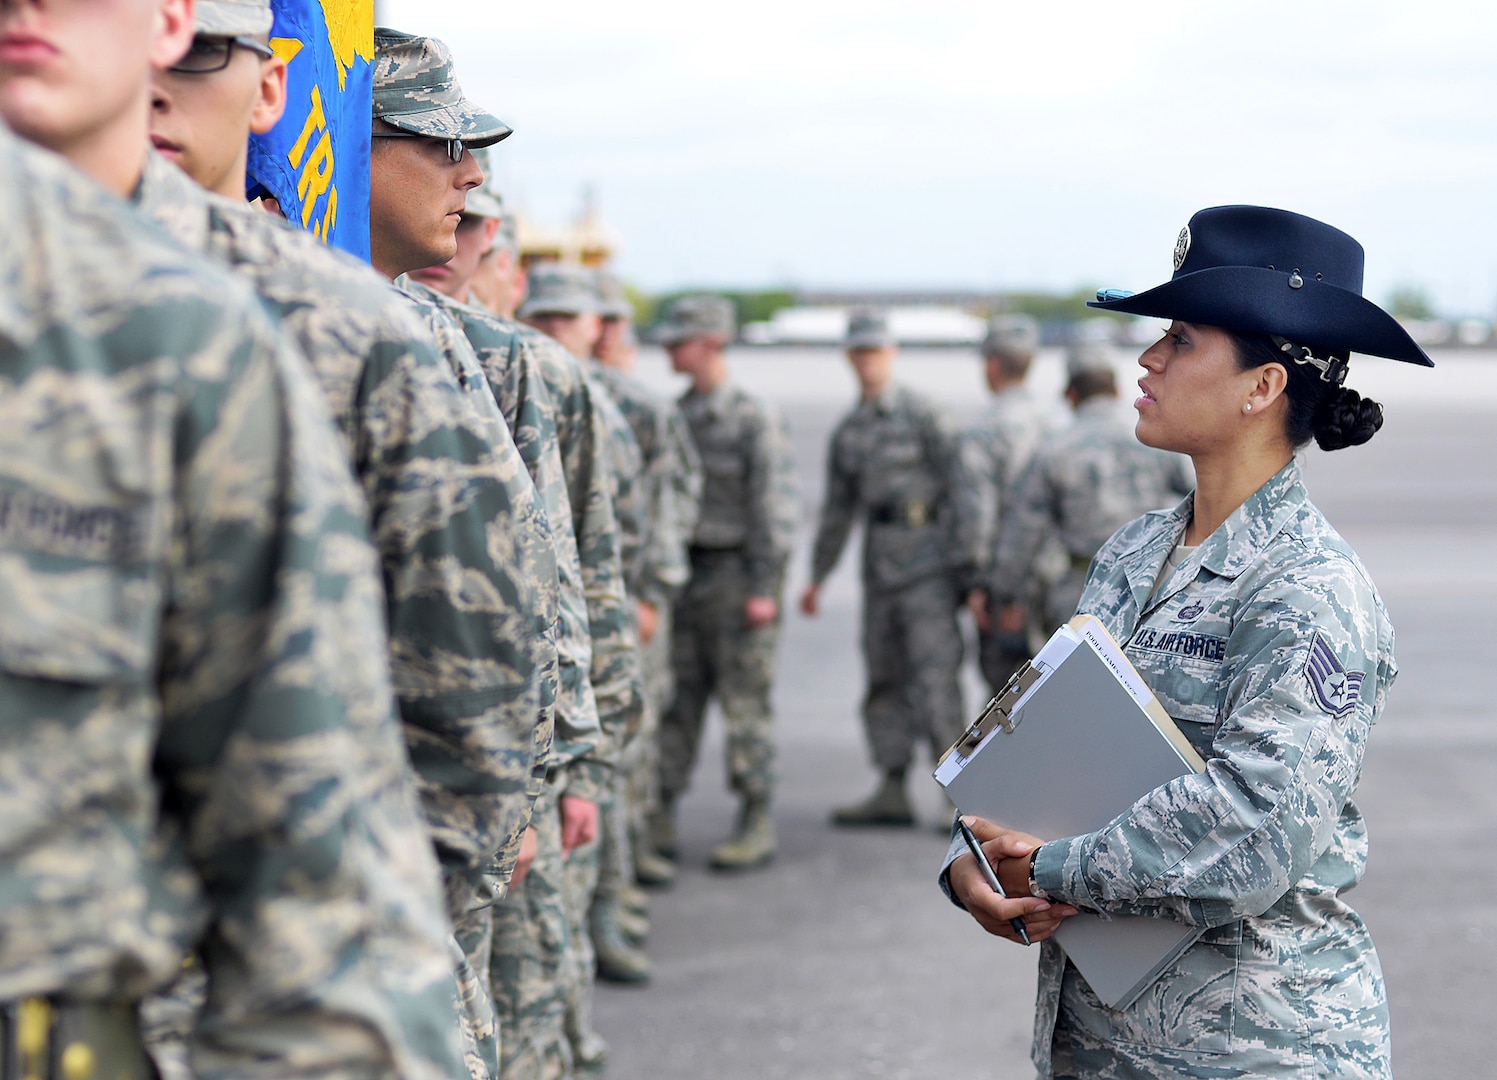 Air Force Staff Sgt. Maria Escobar, a military training instructor with the 737th Training Group, addresses a trainee during basic military training at Joint Base San Antonio-Lackland, Texas, May 20, 2014.  Escobar, a member of the Massachusetts Air National Guard, volunteered for MTI duty to teach and mentor future Airmen.